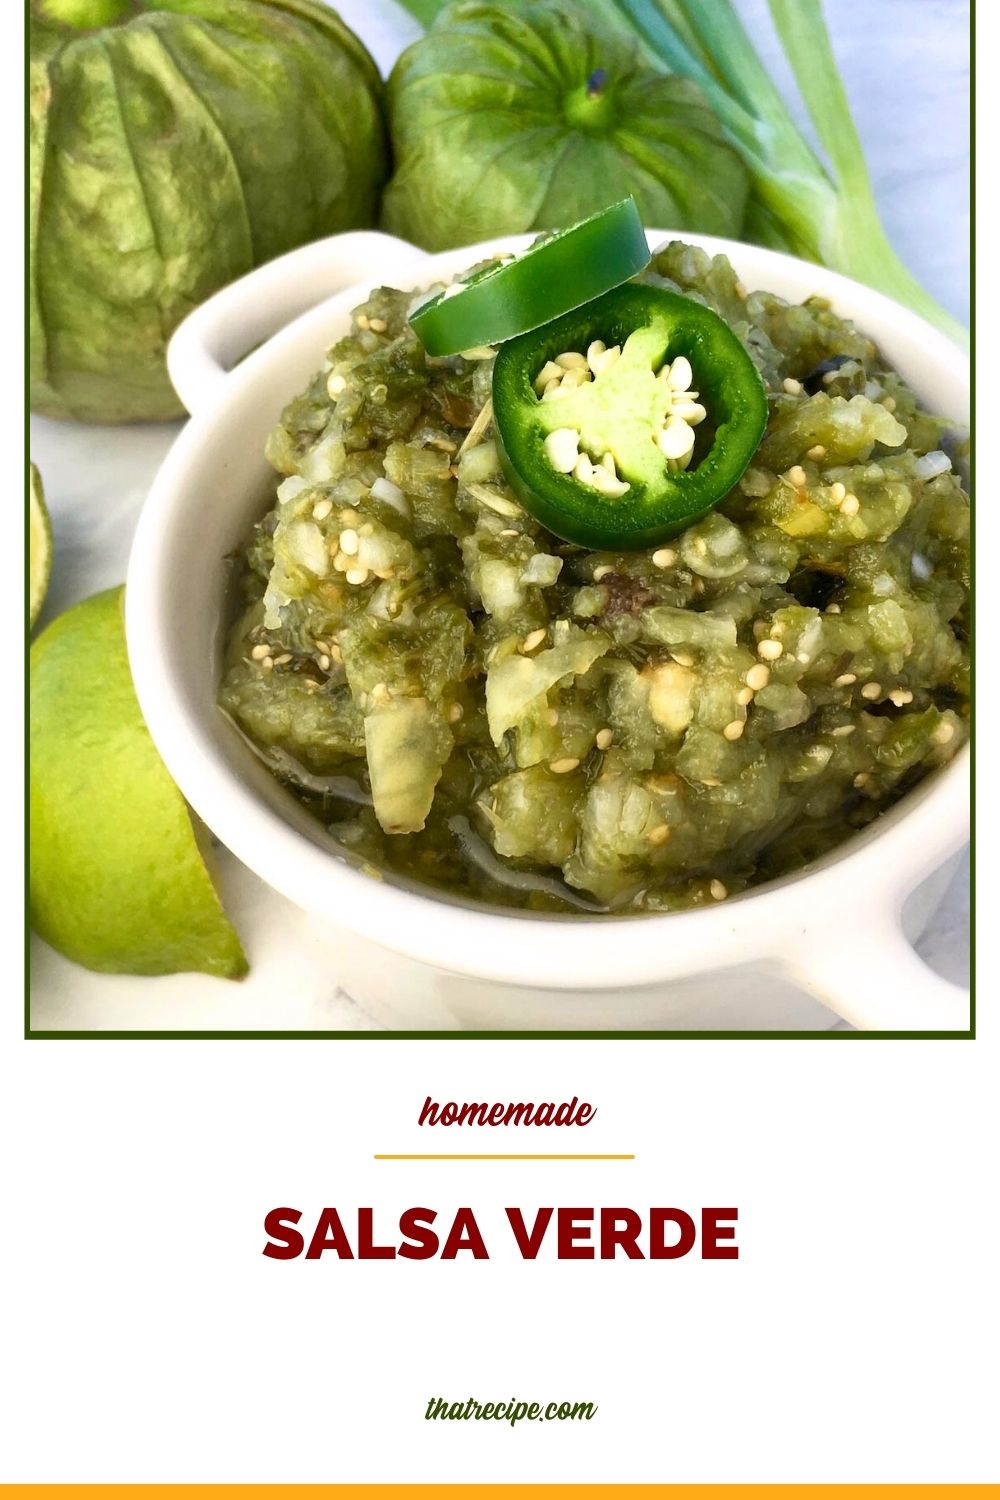 bowl of salsa verde with limes, tomatillos, peppers and onions surrounding it and text overlay "fresh homemade salsa verde"